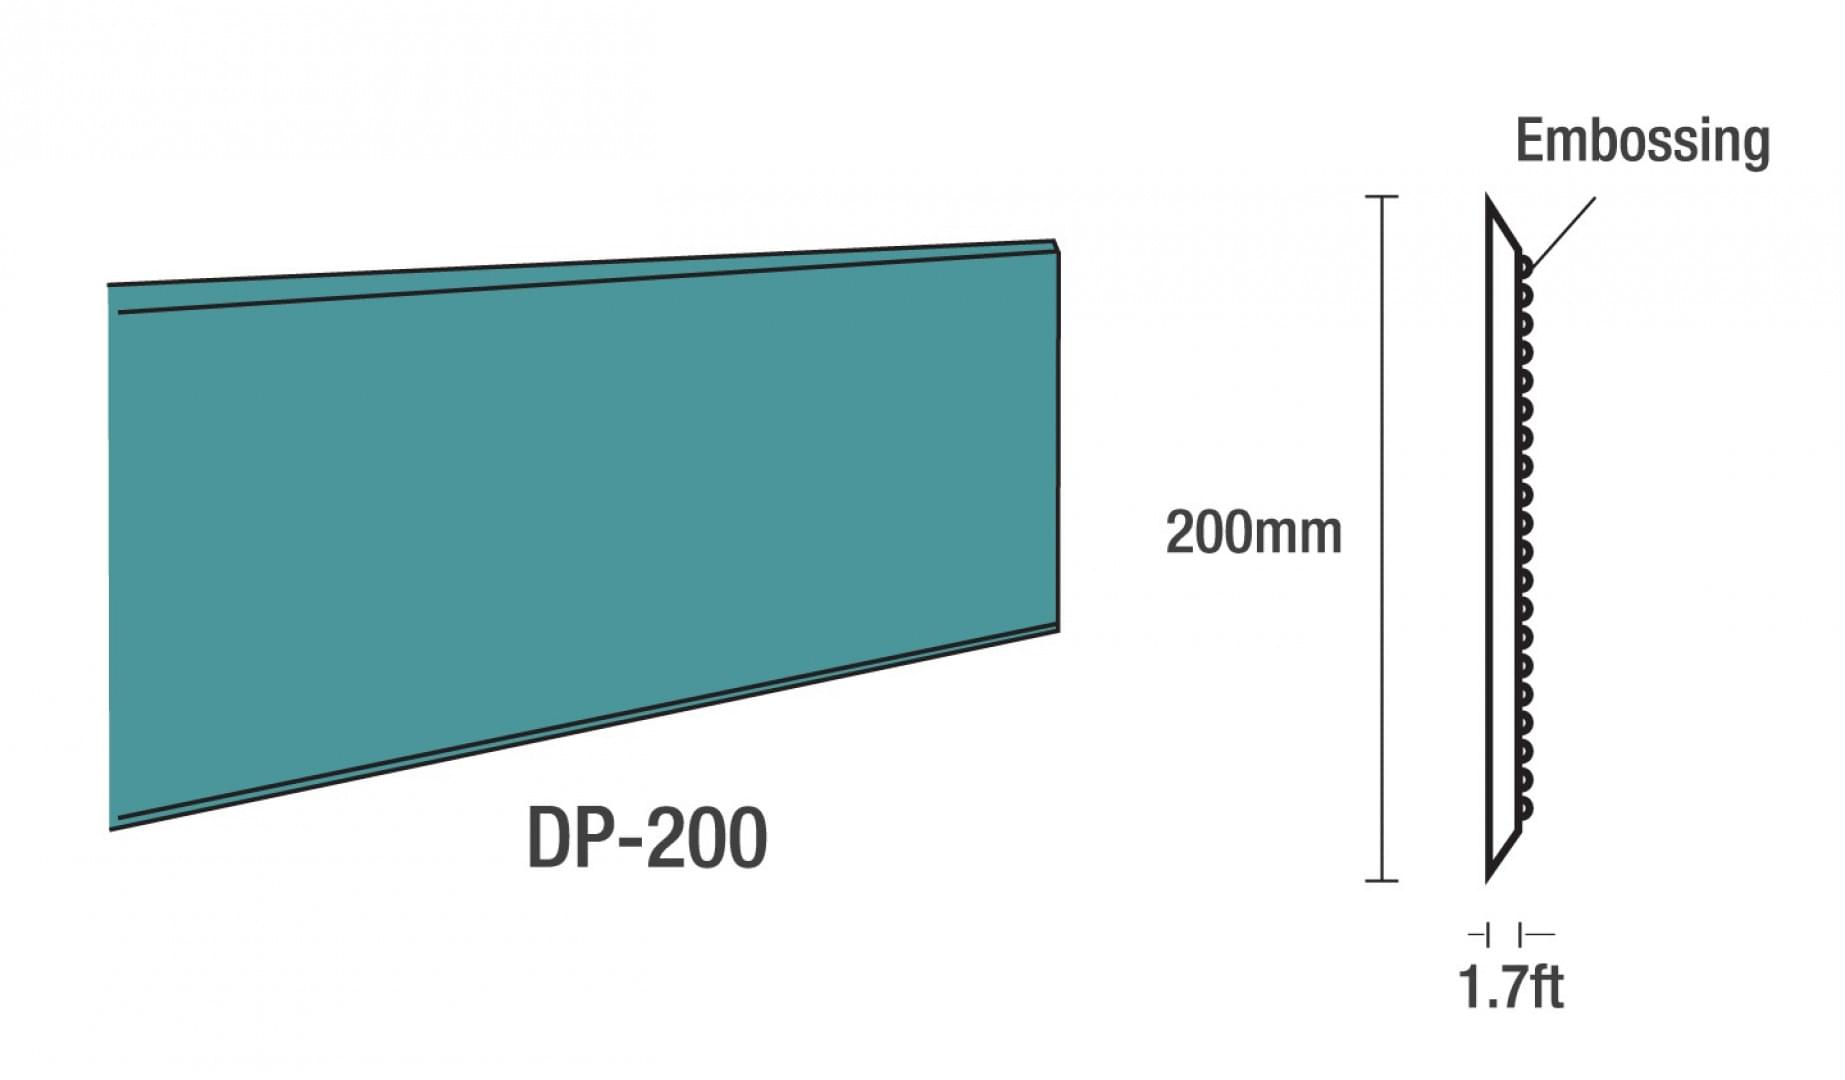 DP-200 (h:200mm w: 1.7ft) from Haema